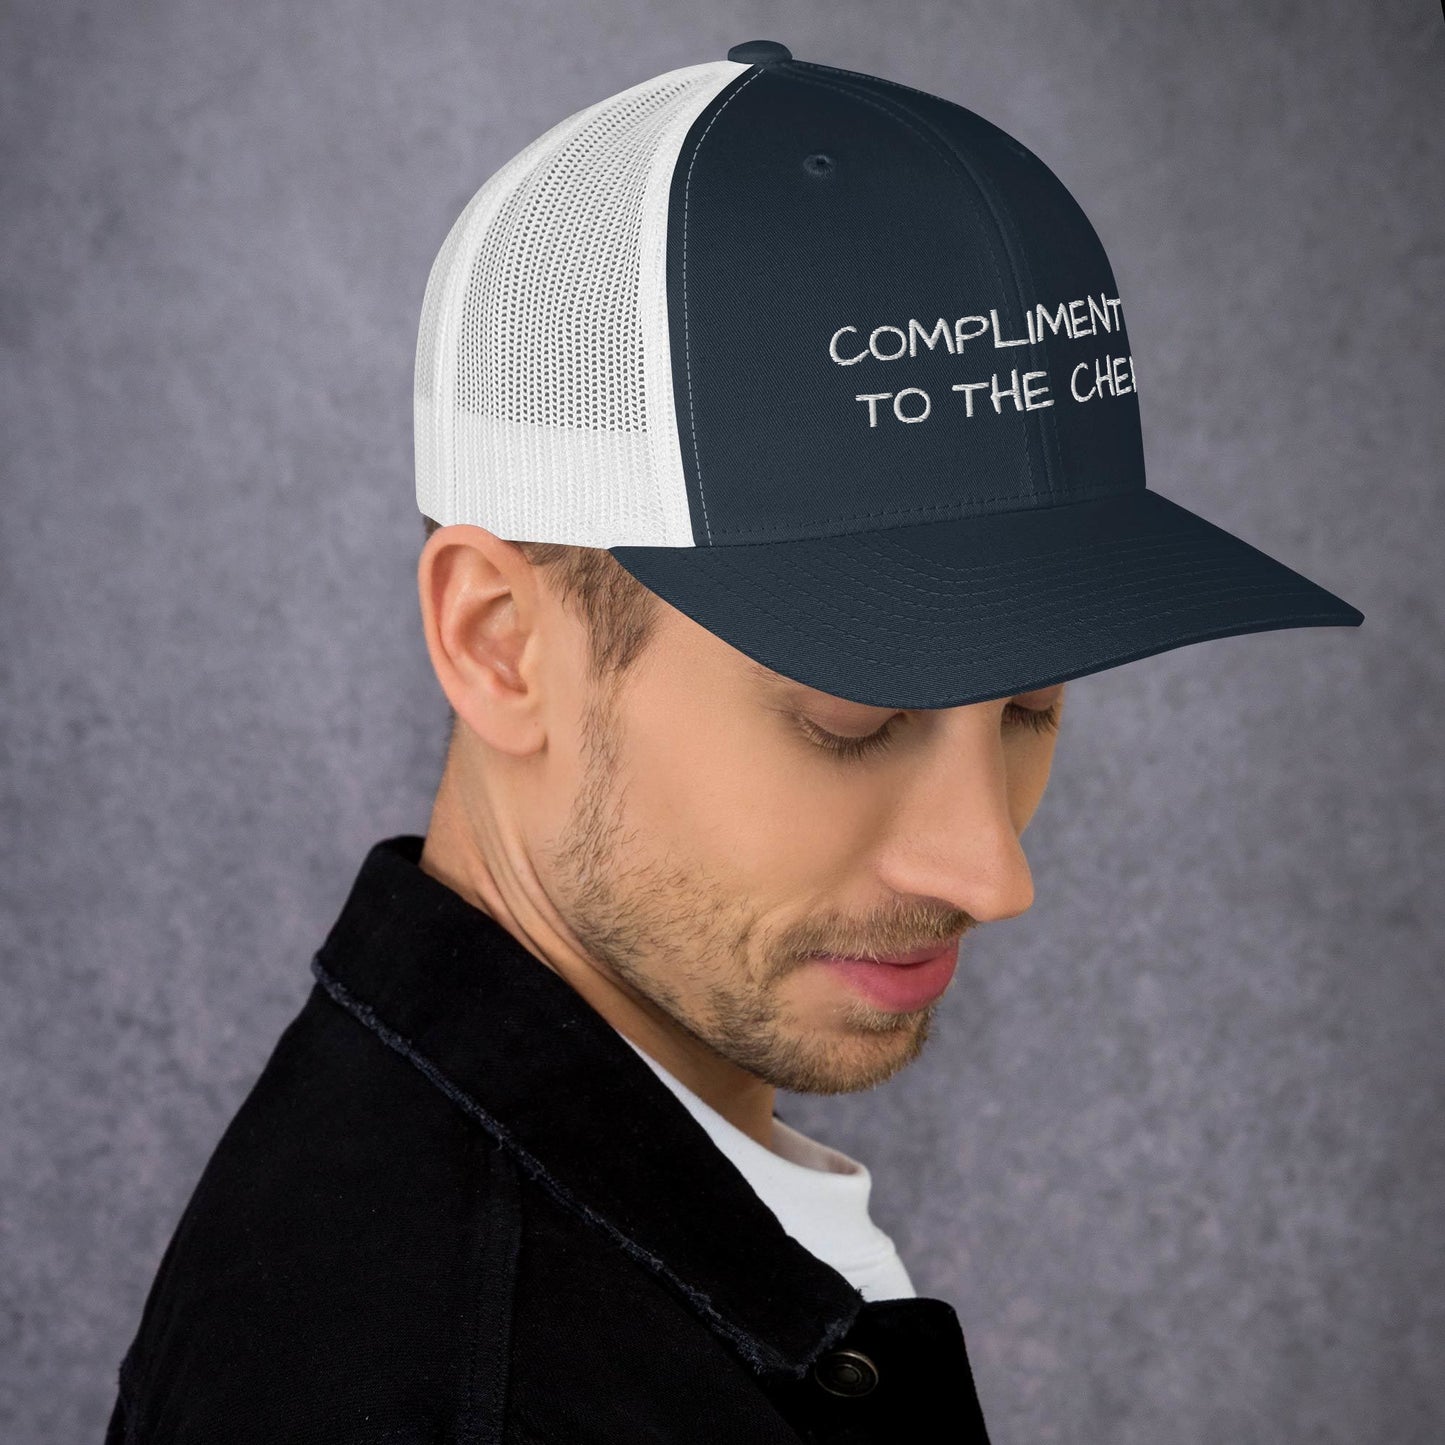 Compliments to the Chef - Trucker Cap